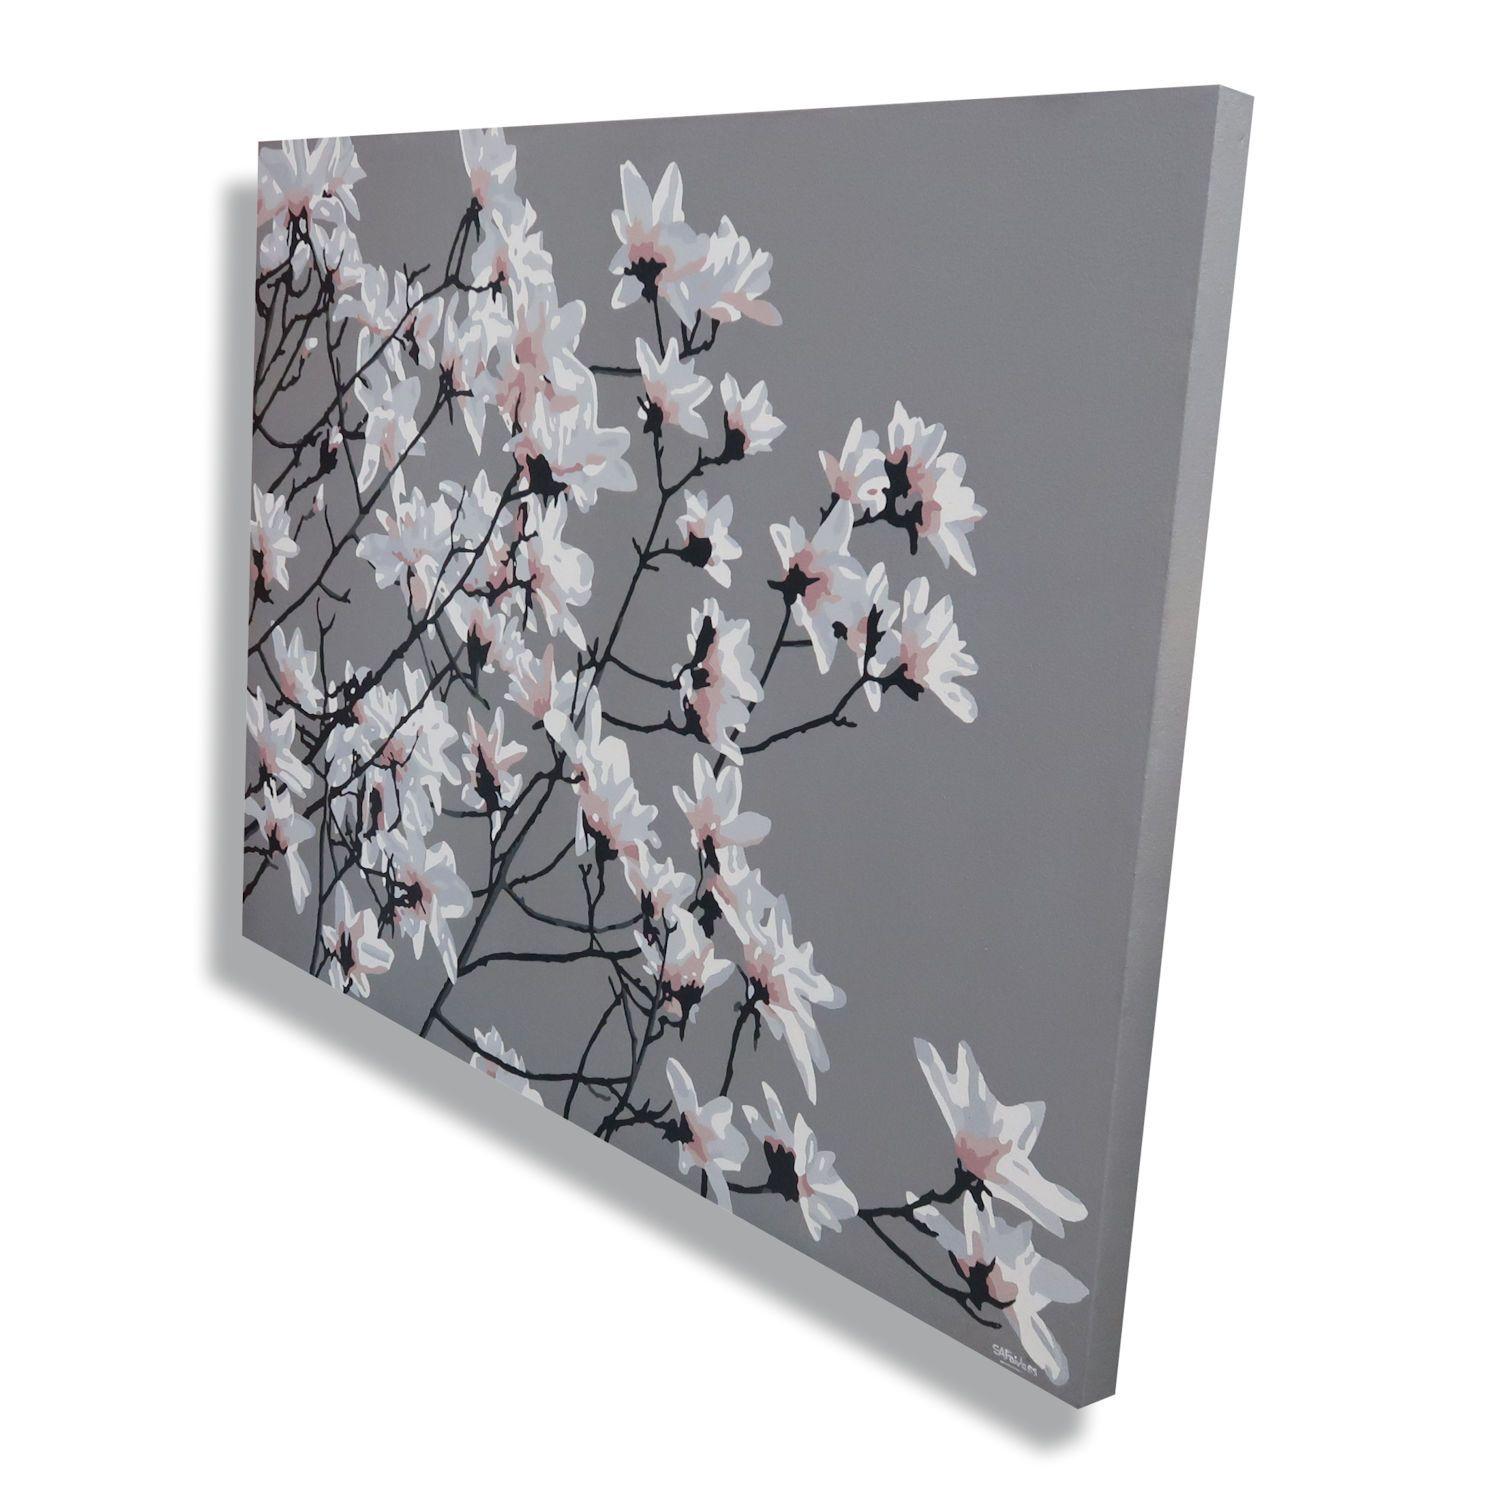 A large floral painting of a magnolia flowering in spring. These white flowers are always a cheery sight at the beginning of the year. Spring is such a beautiful time of year full of freshness and new growth after the winter darkness. These flowers